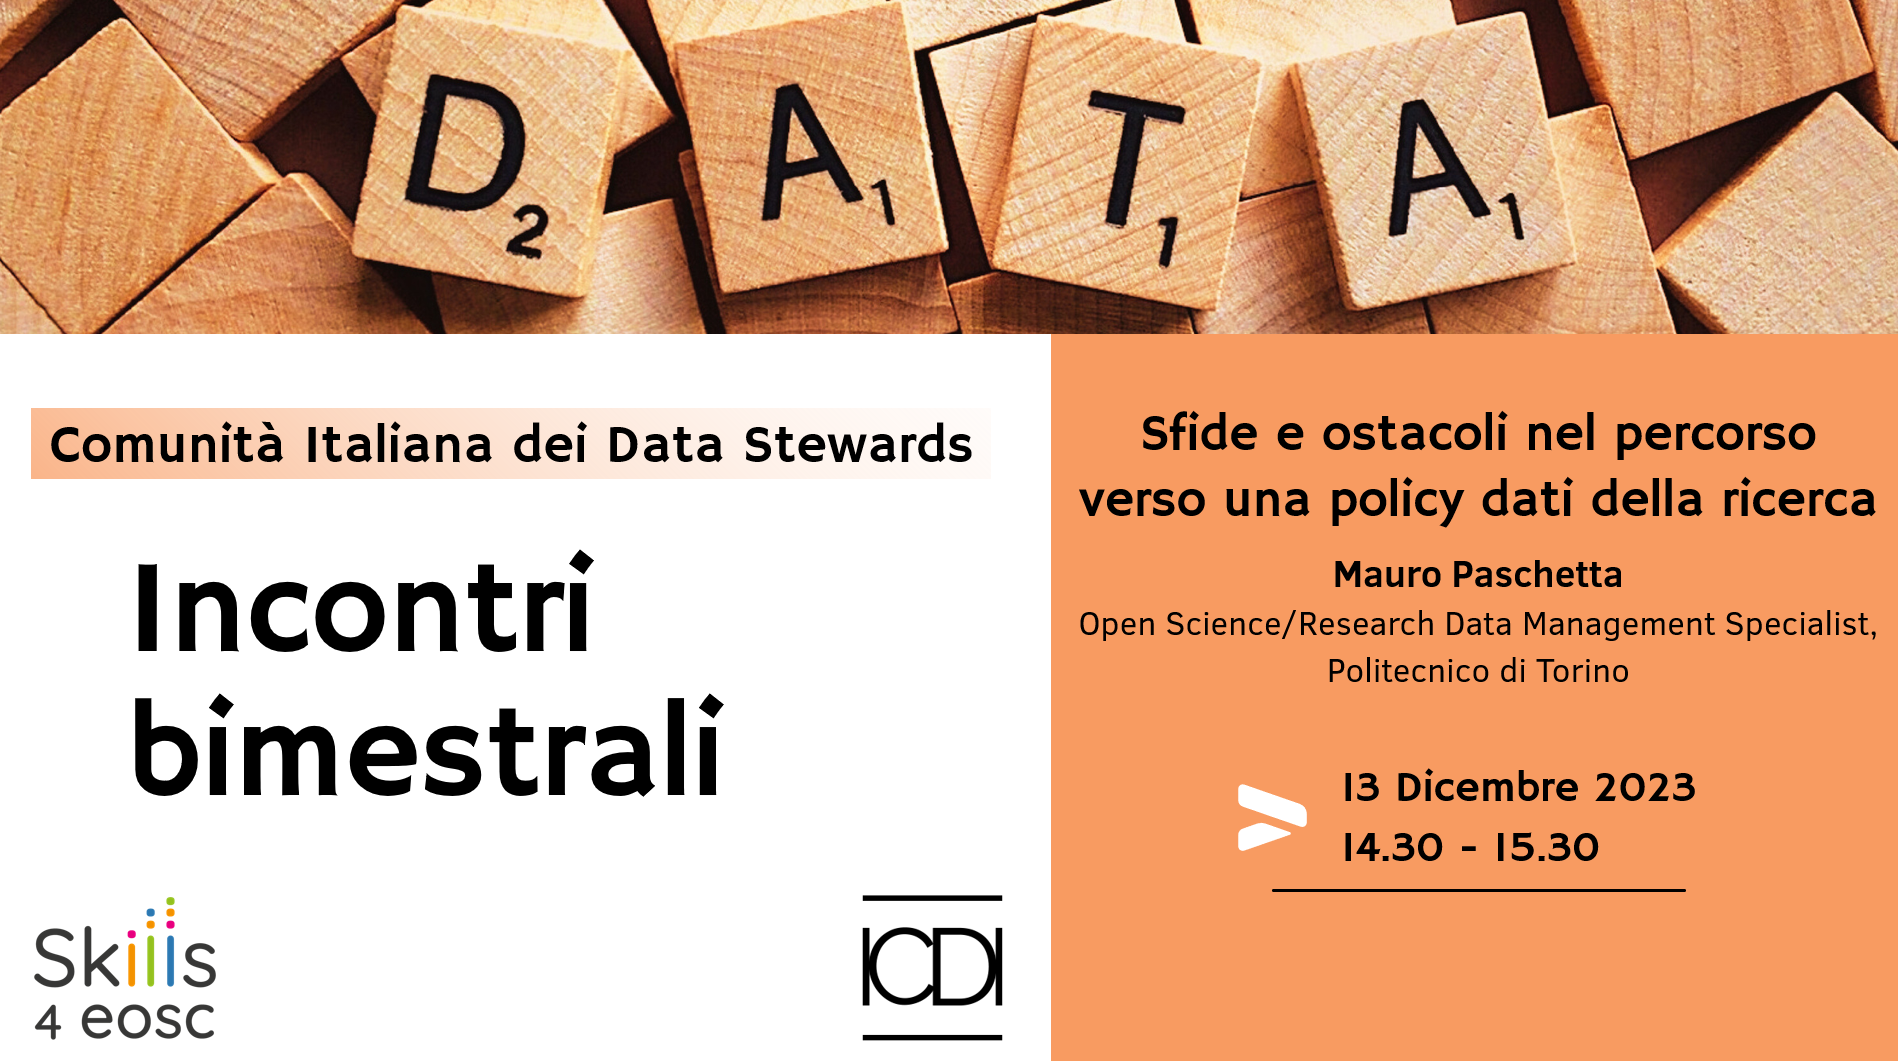 Italian Data Steward Community: Meeting on challenges and obstacles in the path towards a research data policy